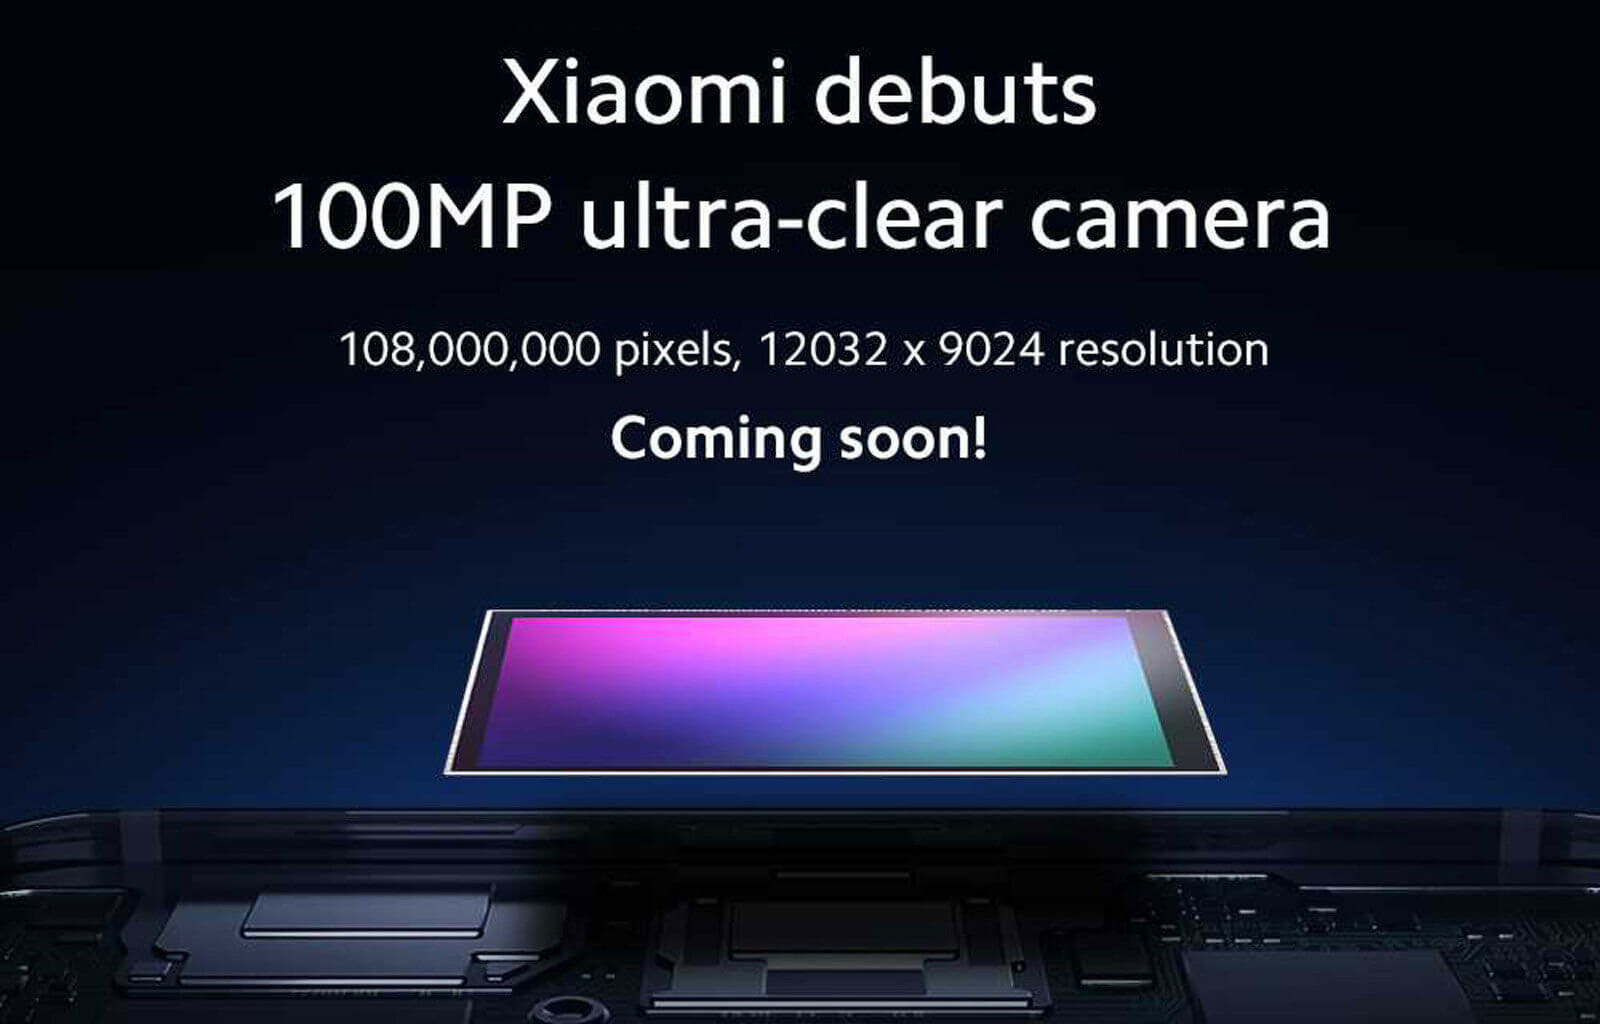 Xiaomi is planning to launch a smartphone with 108-megapixel camera, according to a teaser